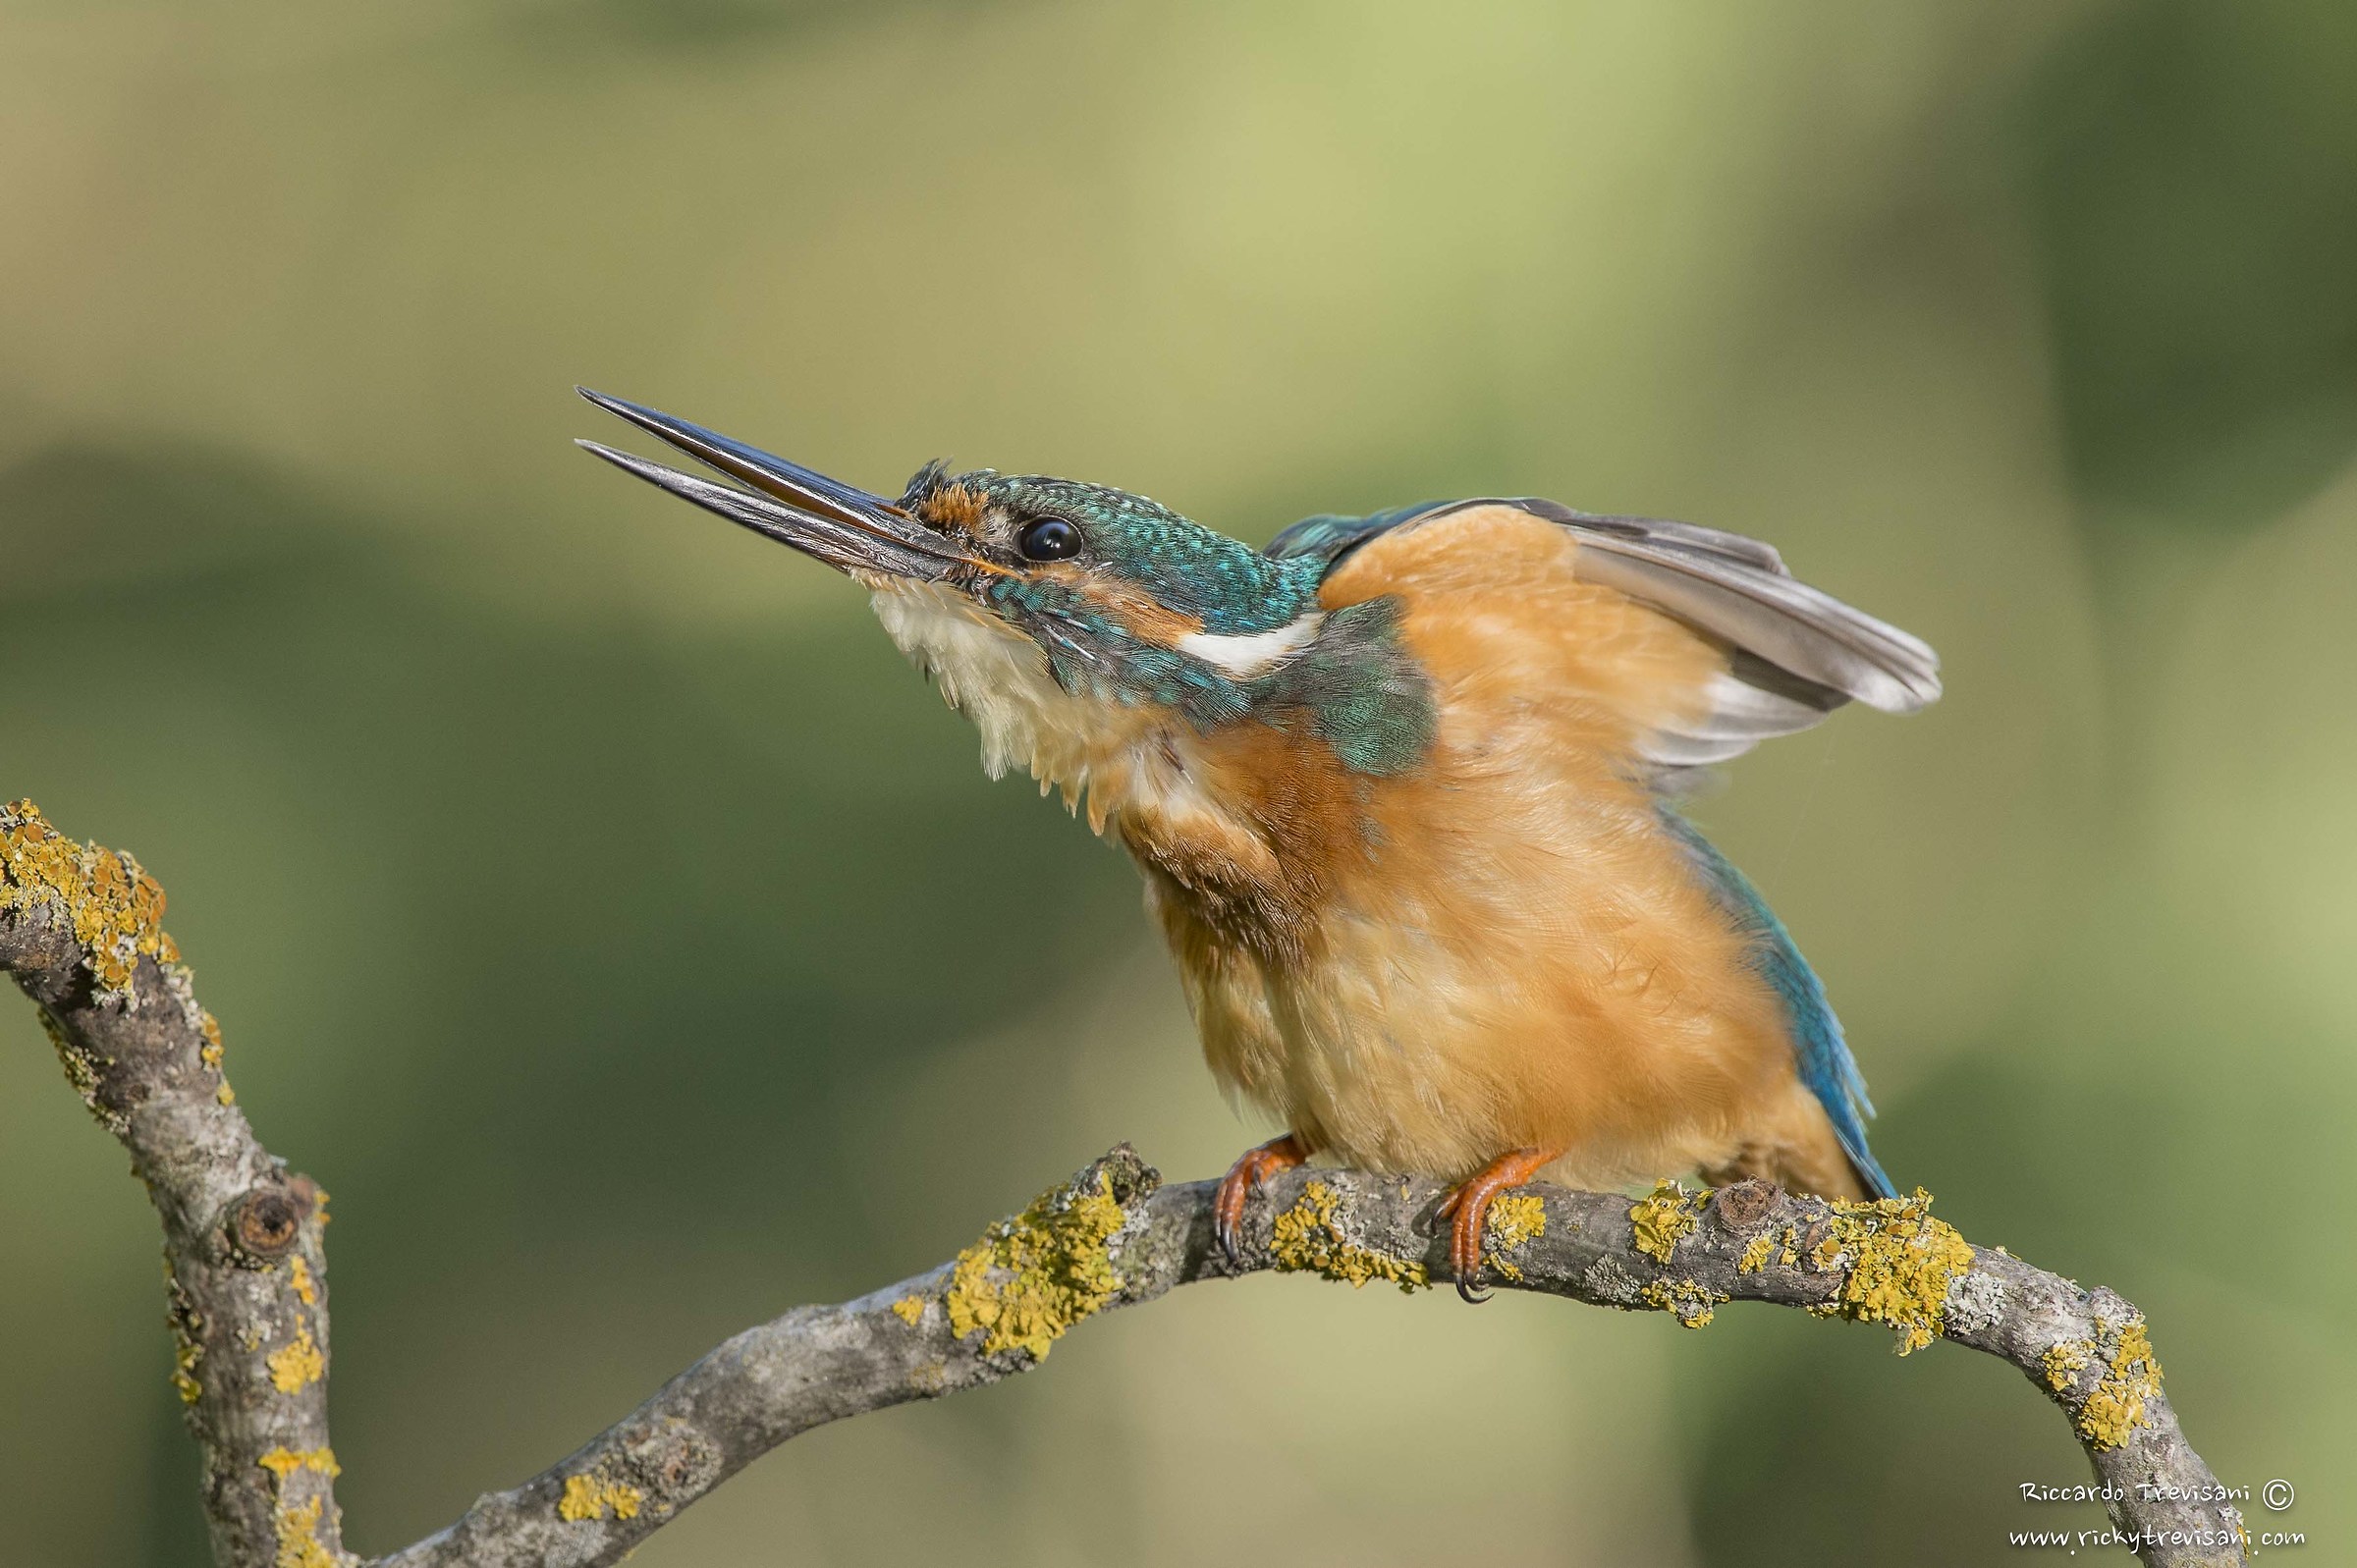 Stretching time, kingfisher...